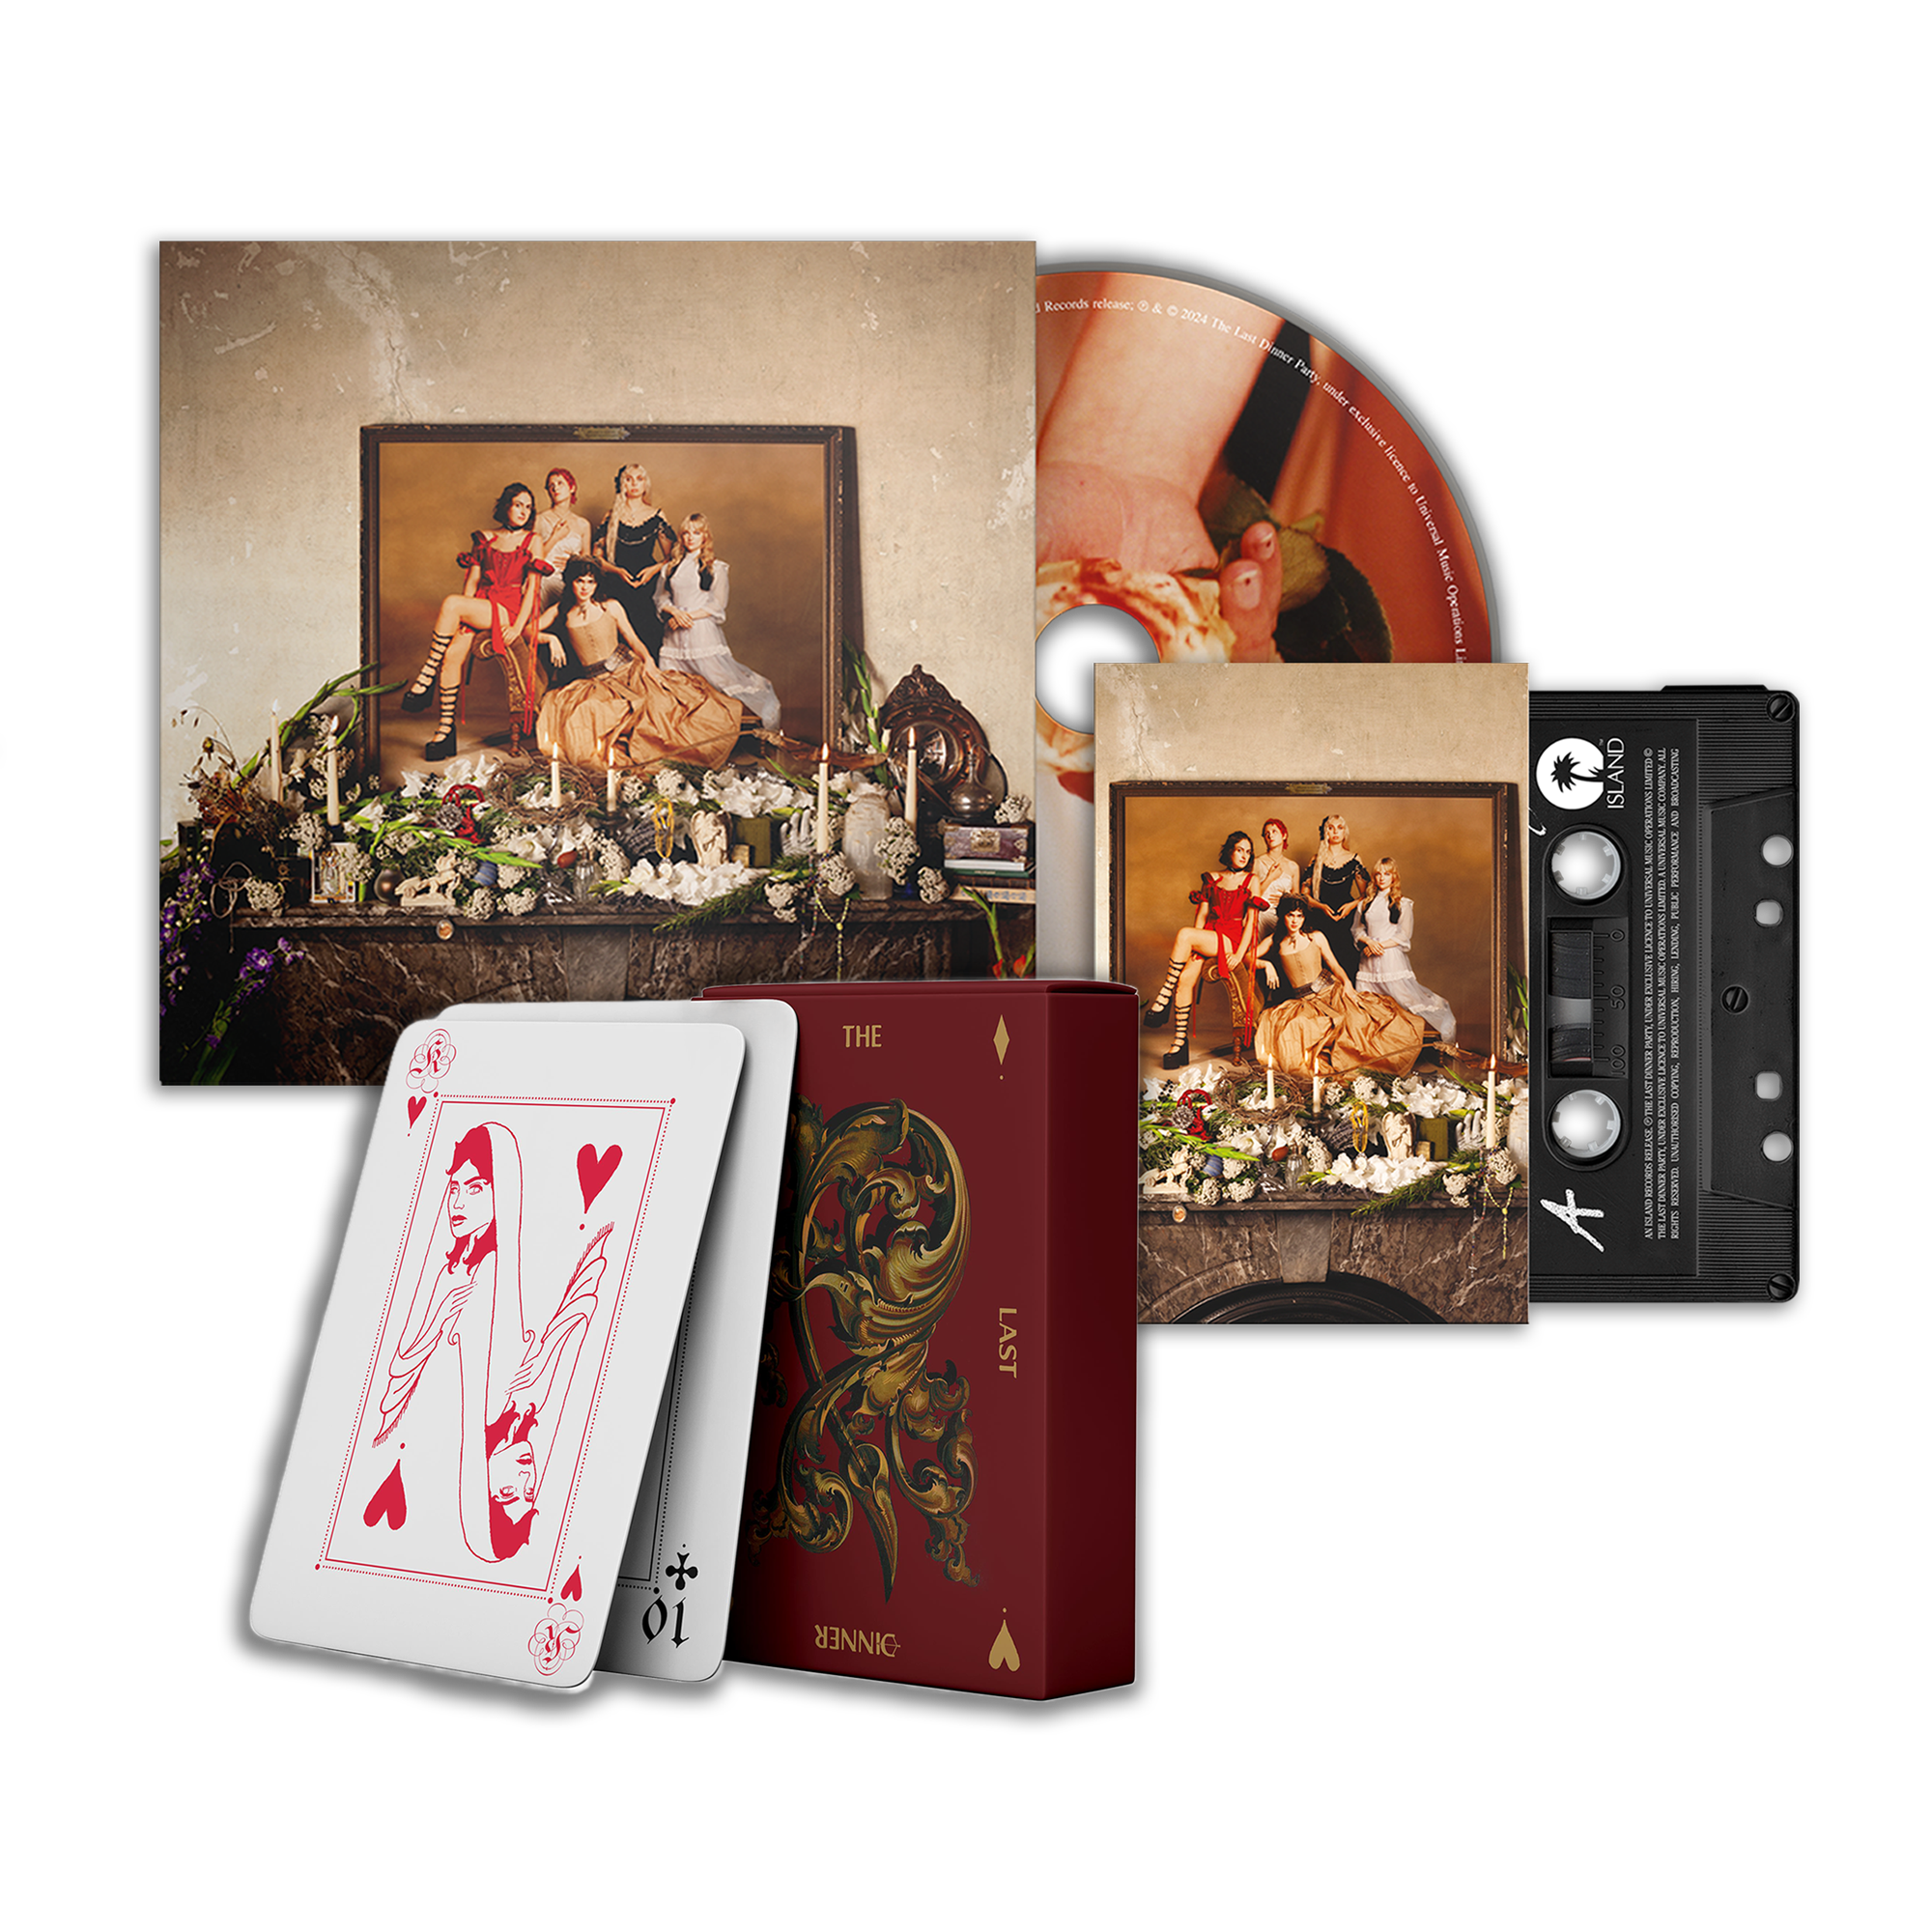 Prelude To Ecstasy: CD, Cassette + Playing Cards